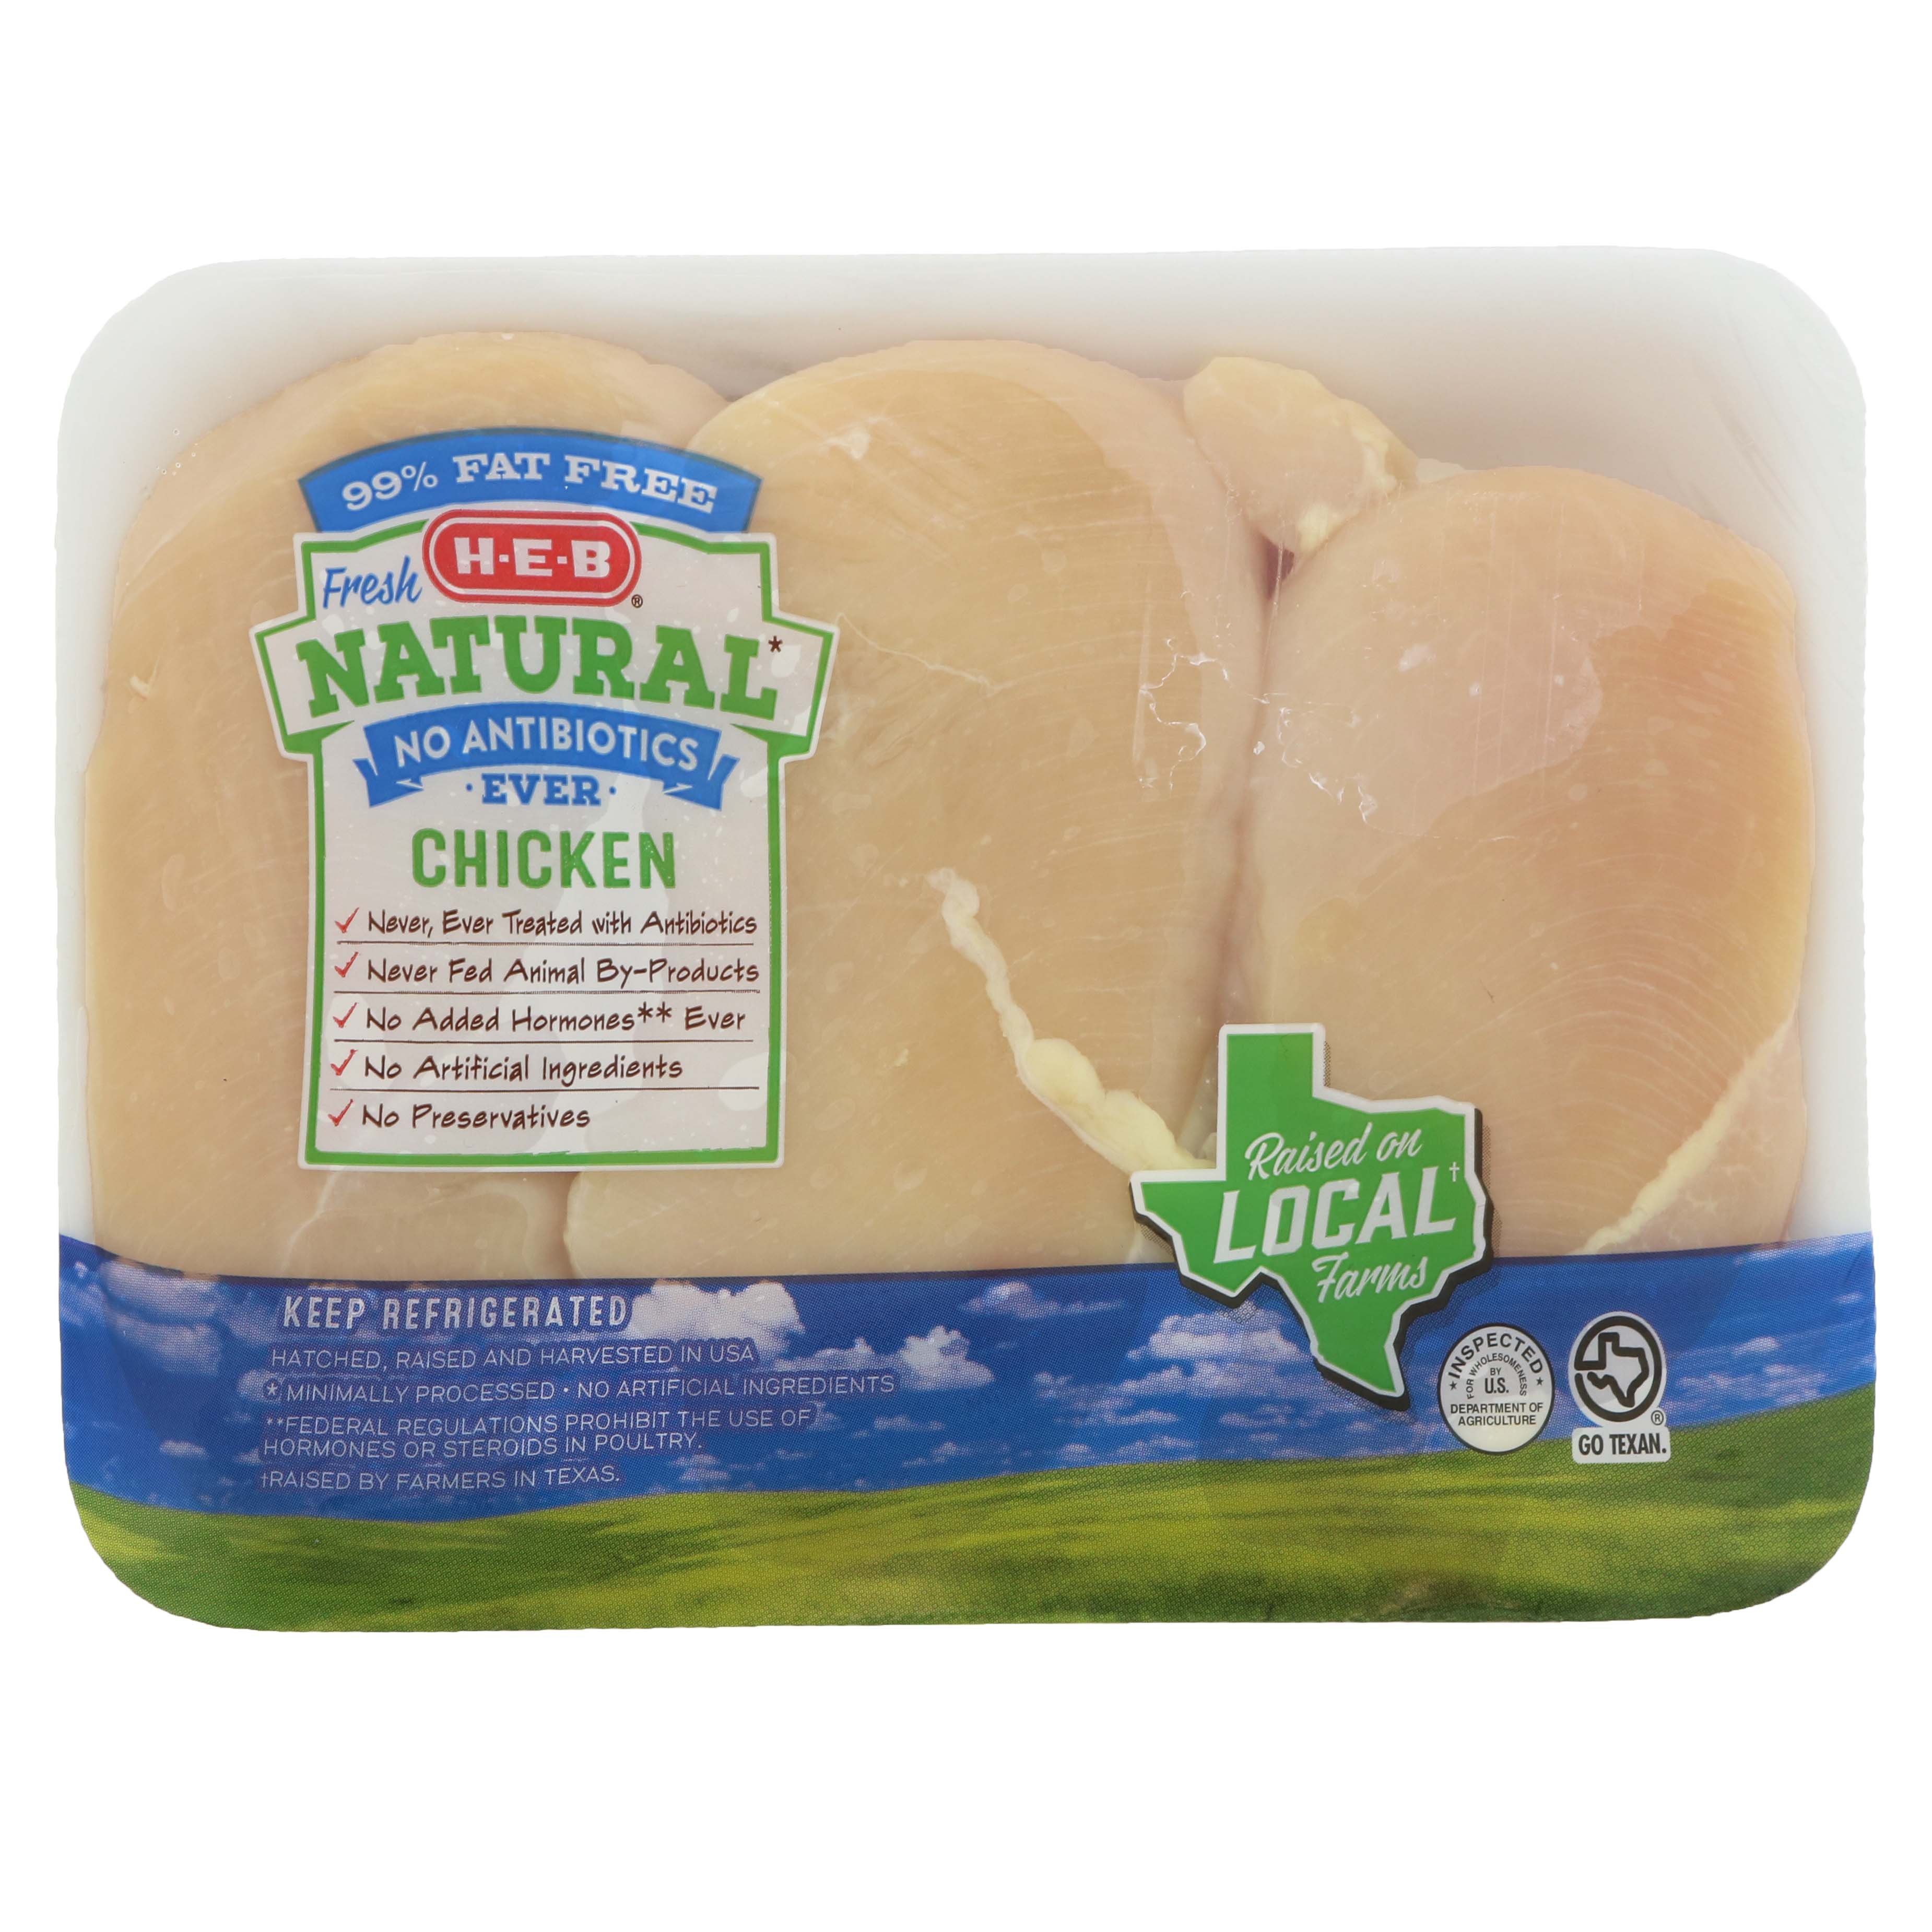 Organic Boneless Skinless Chicken Breast at Whole Foods Market